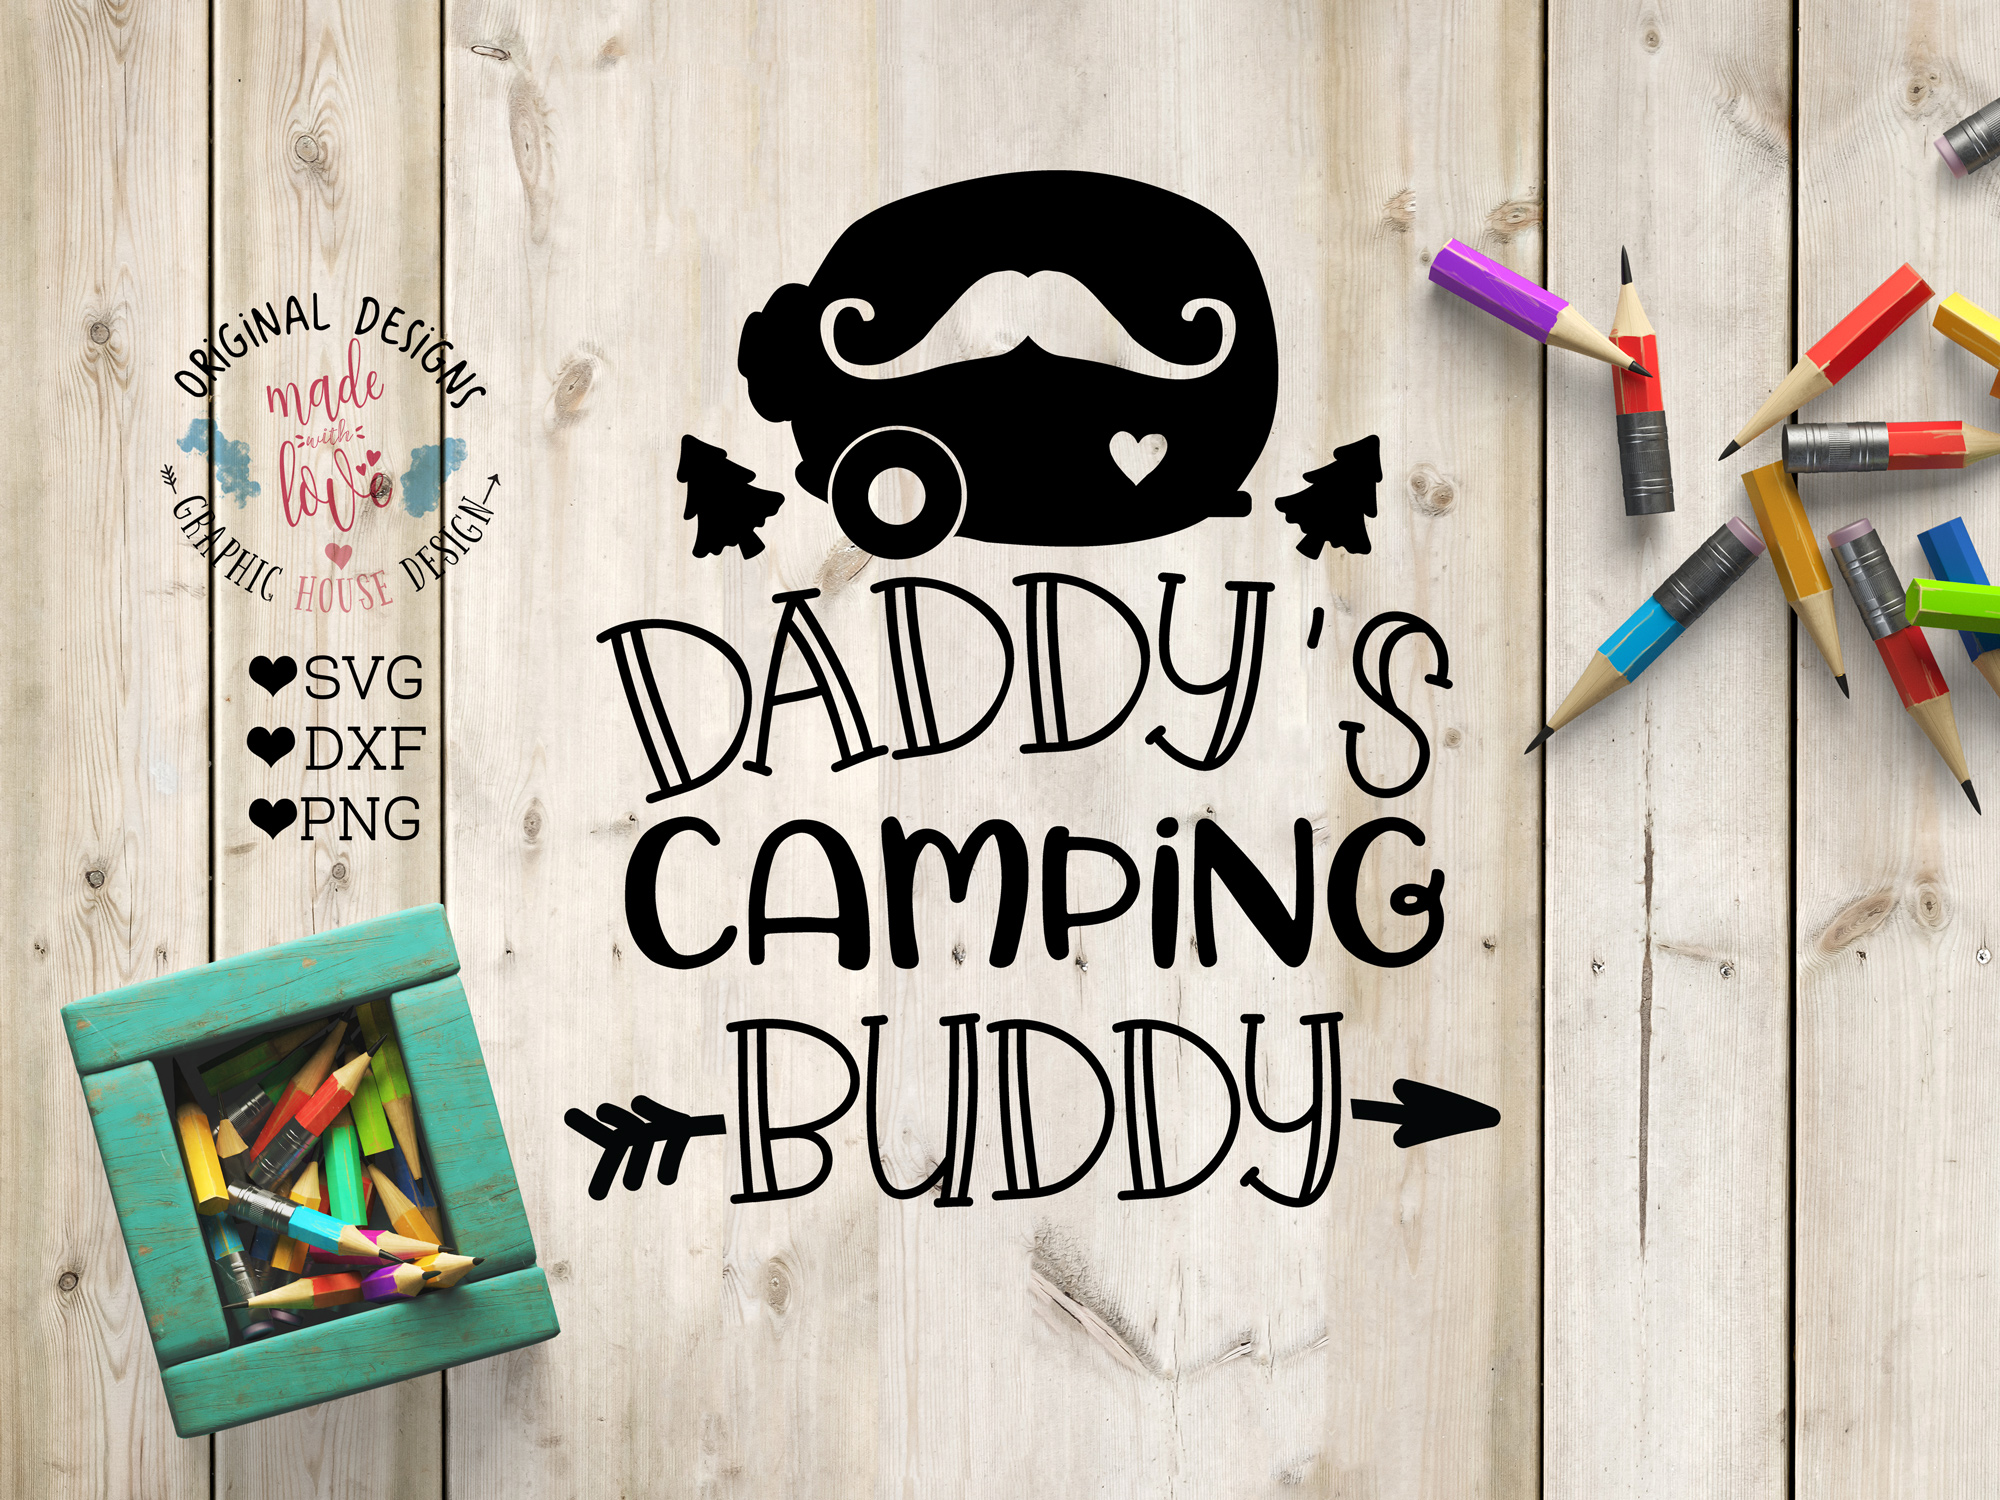 Download Daddy's camping Buddy Cut File in SVG, DXF, PNG